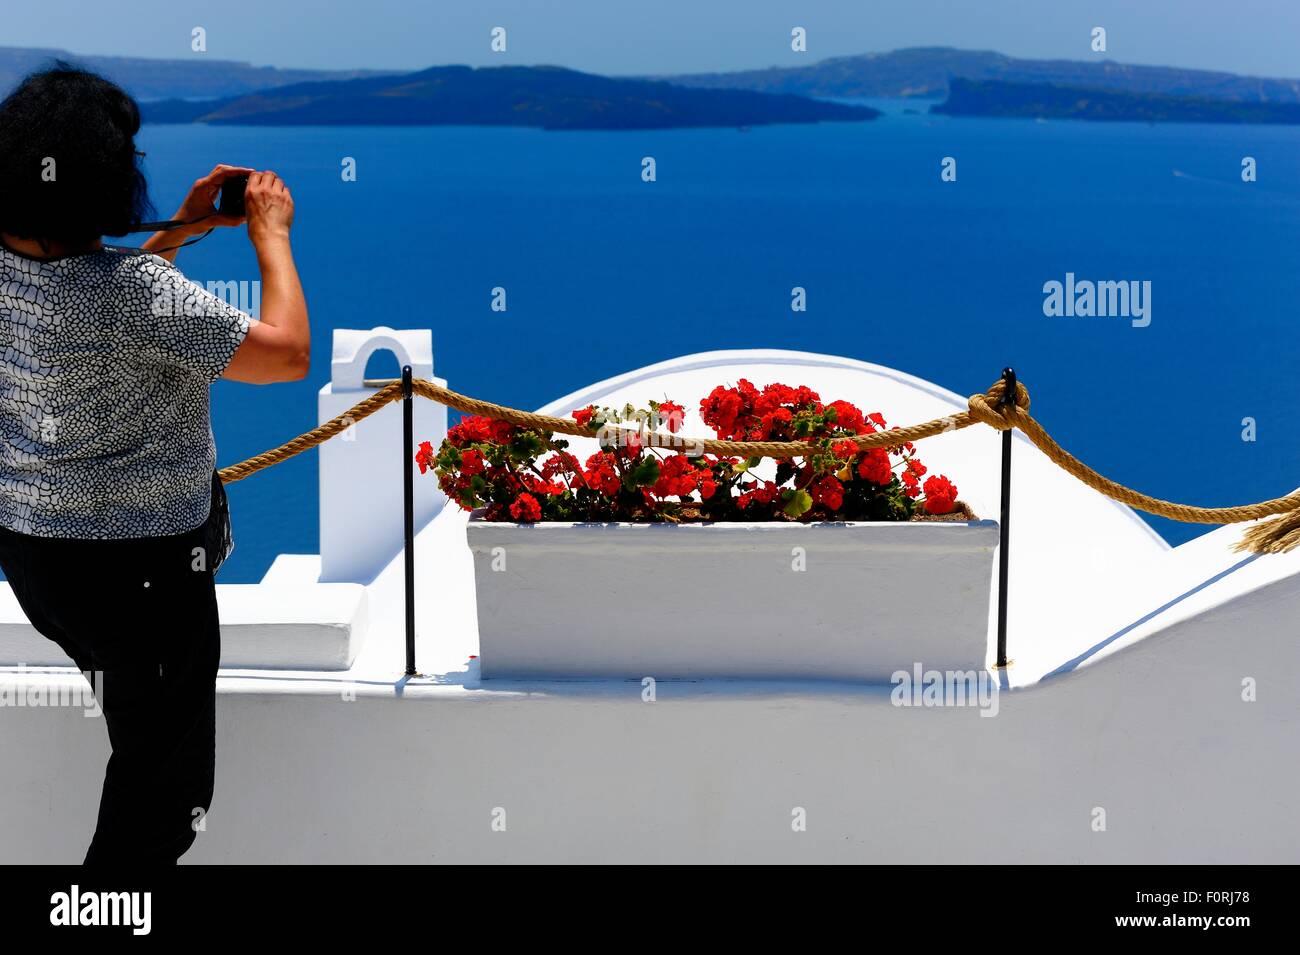 A woman taking a photograph of a red flower box overlooking the caldera in Oia Santorini Greece. Stock Photo